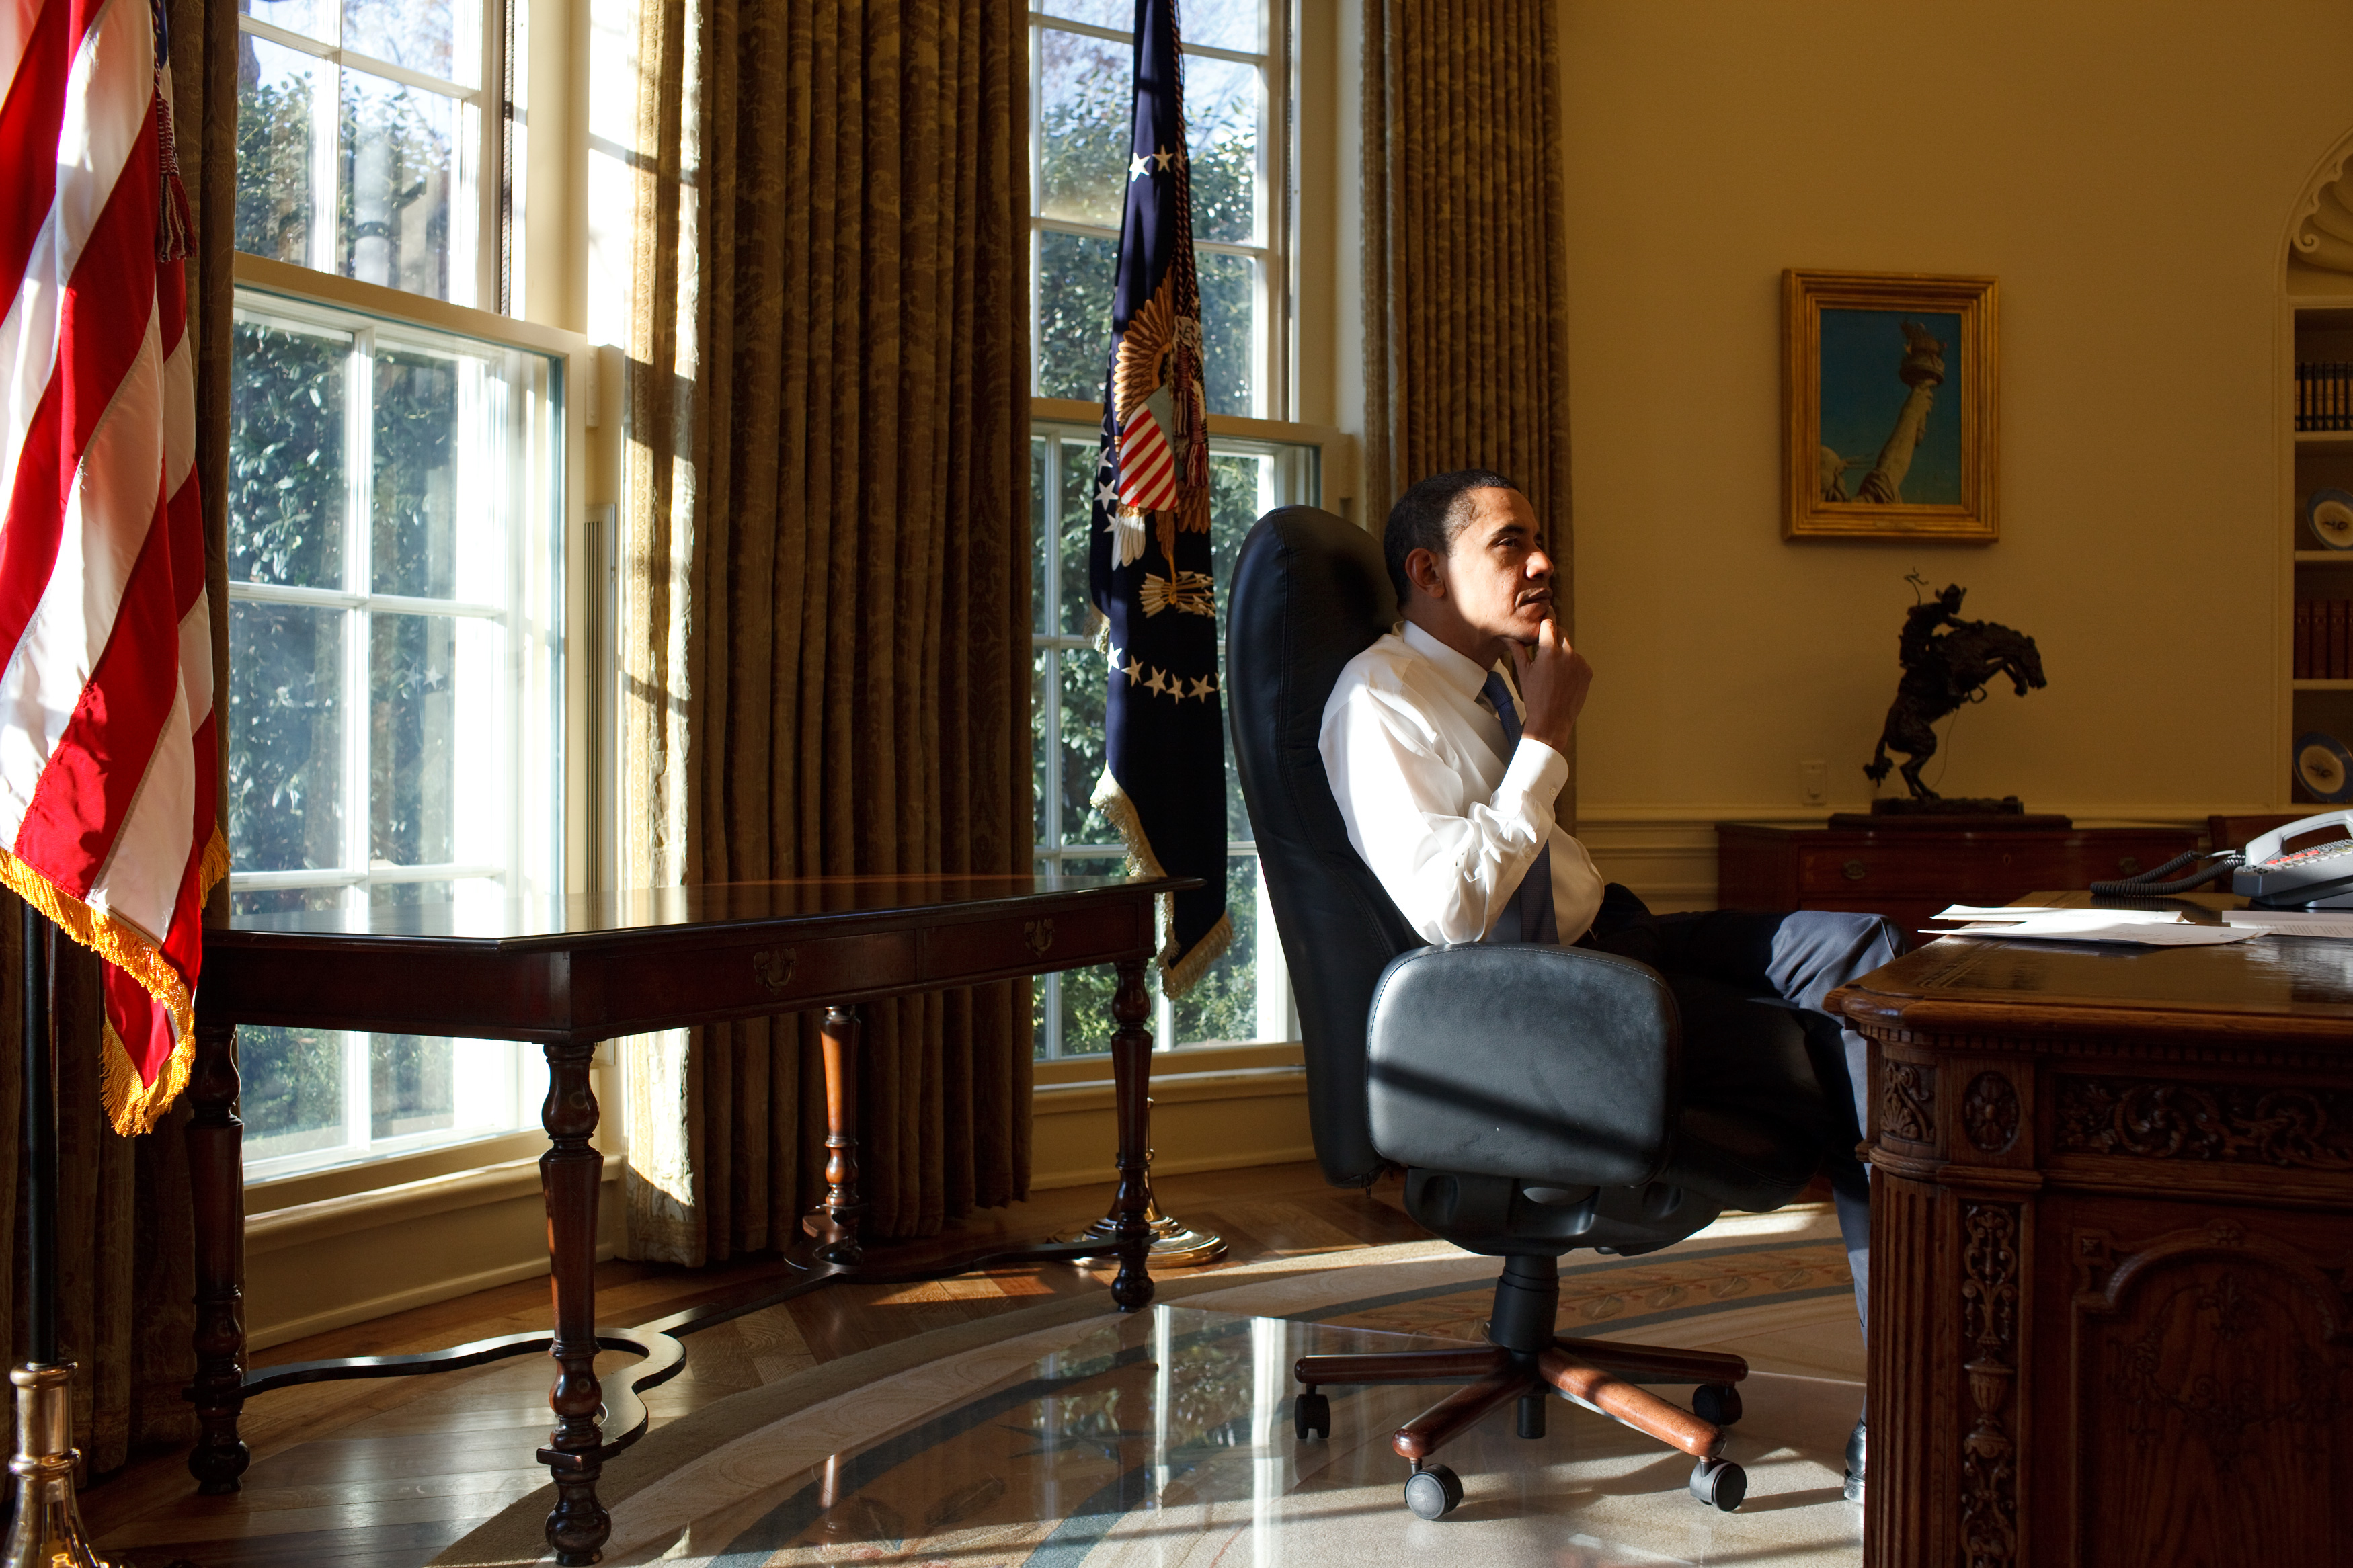 President Barack Obama in the Oval Office on his first day in office 1/21/09.